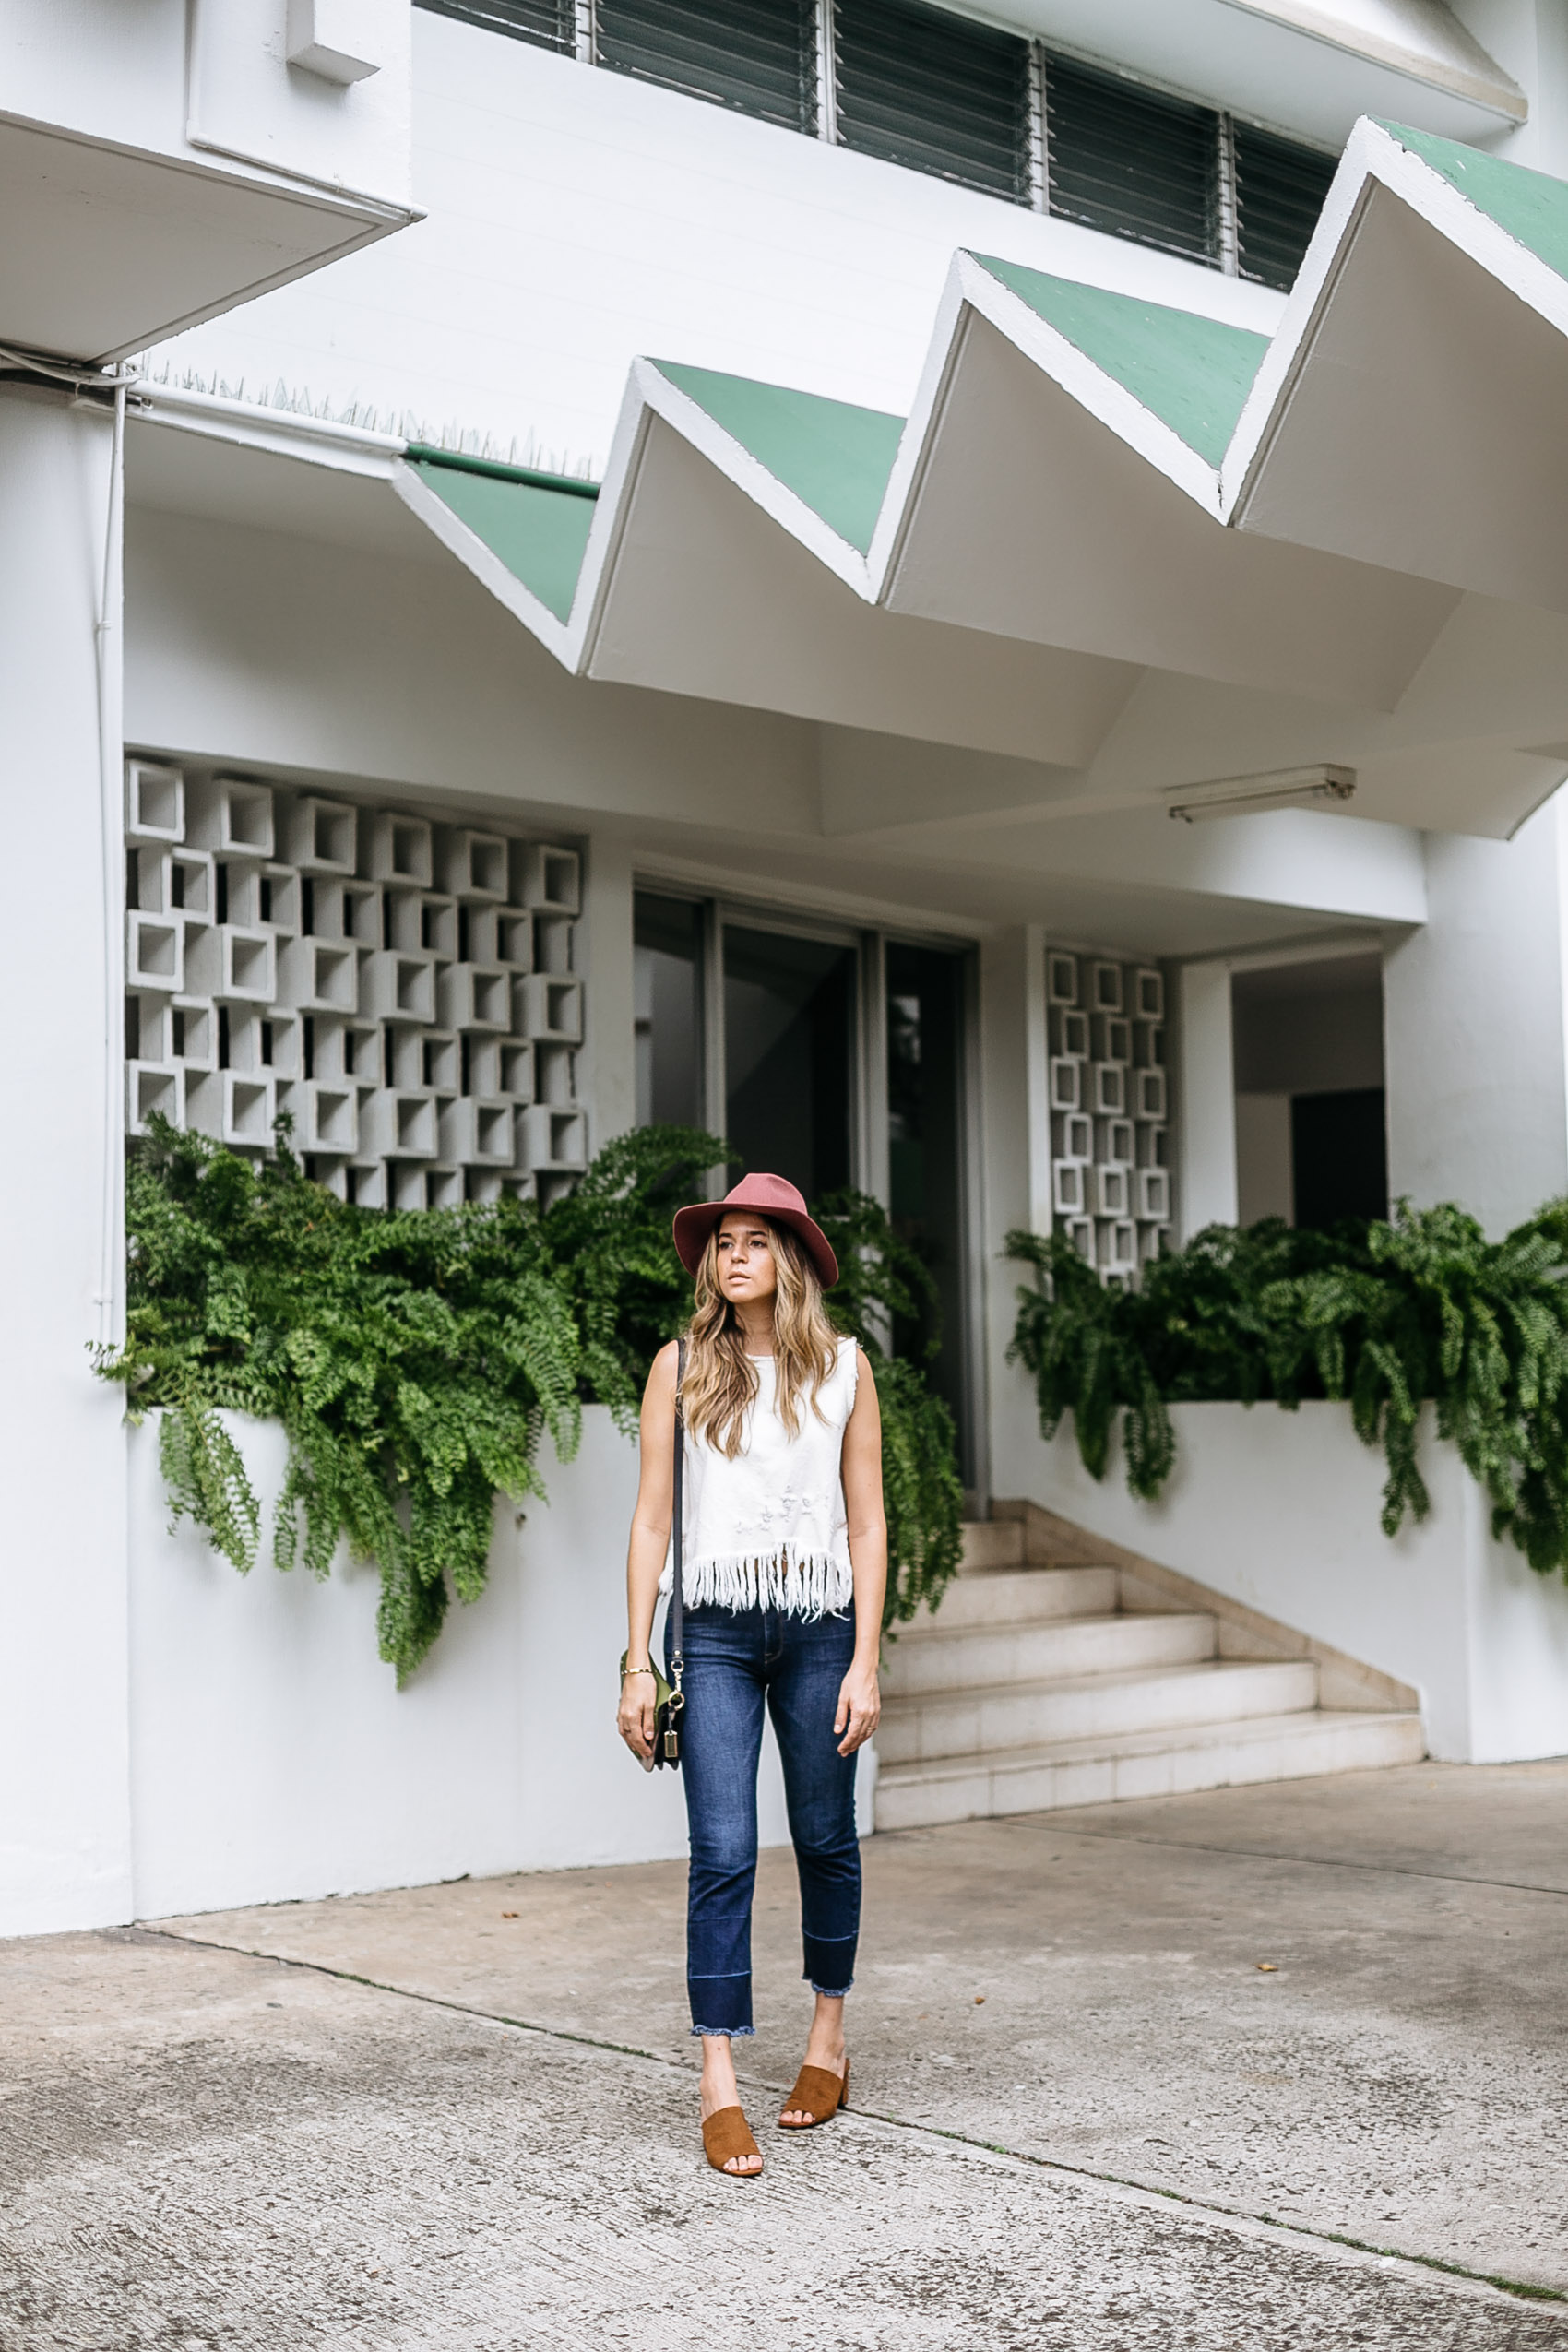 Blogger Maristella in front of a Panama tropical modernist apartment building from the 1960s or 70s